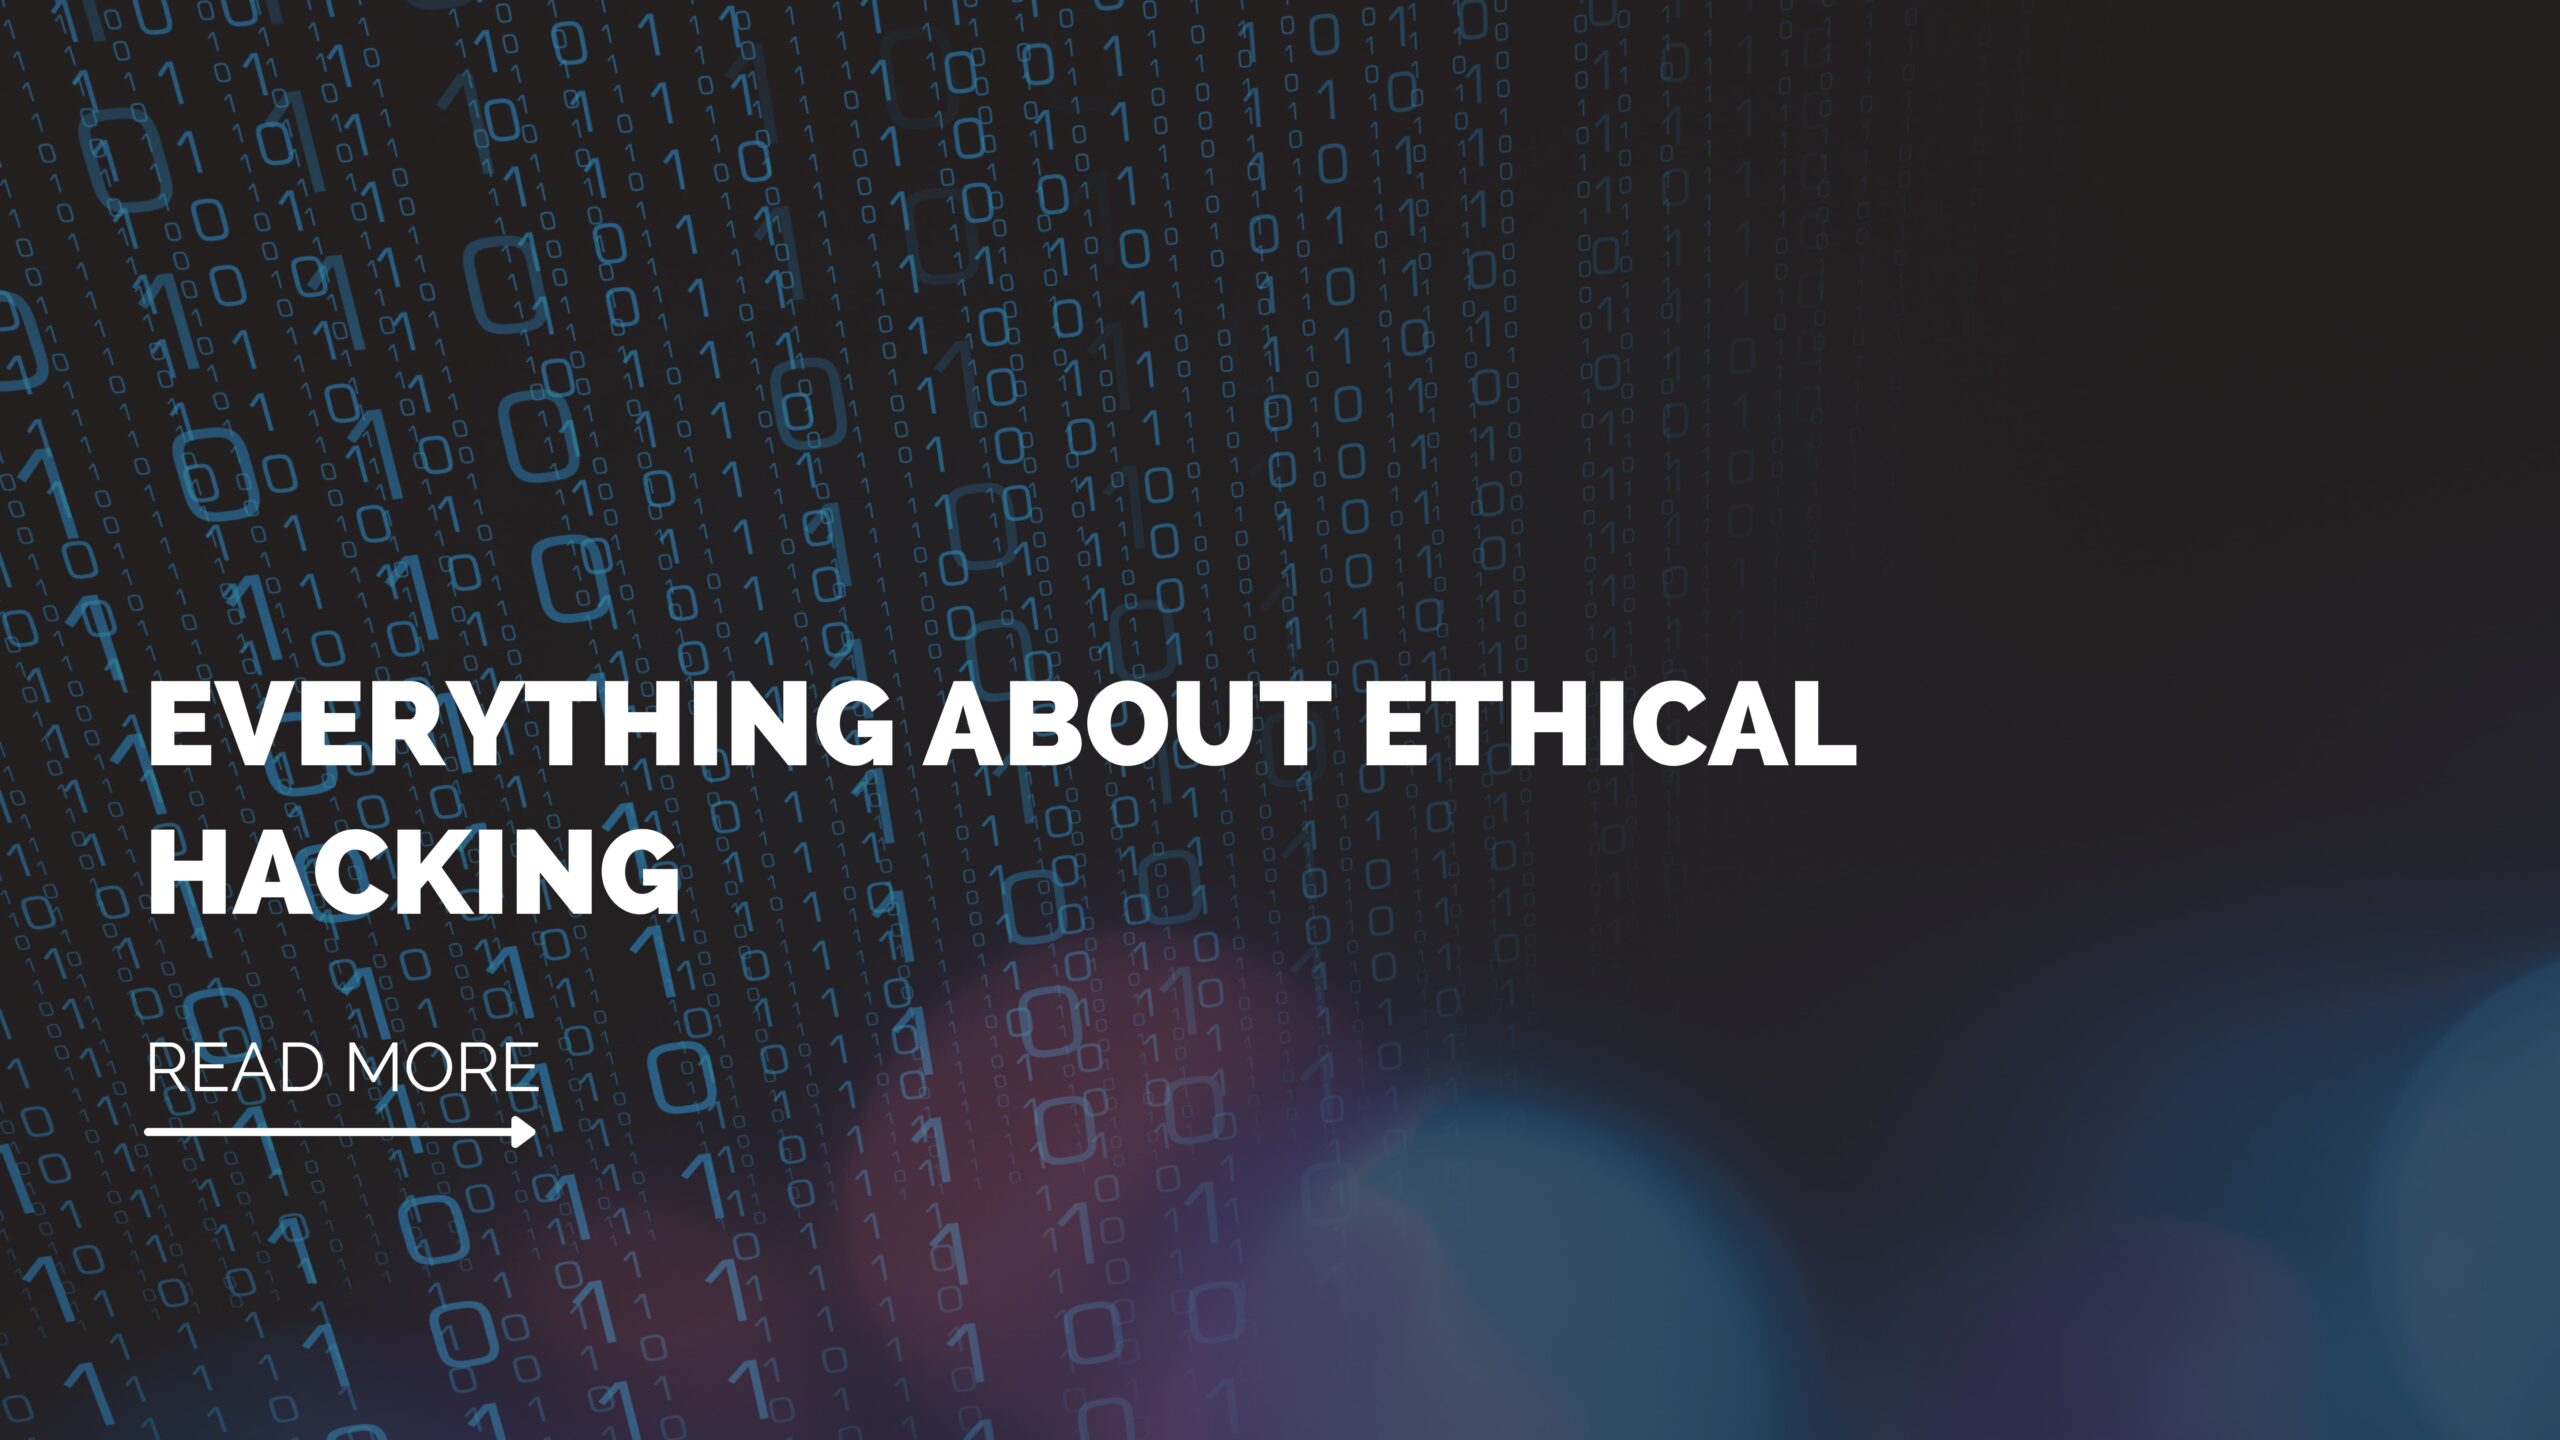 A guide to ethical hacking